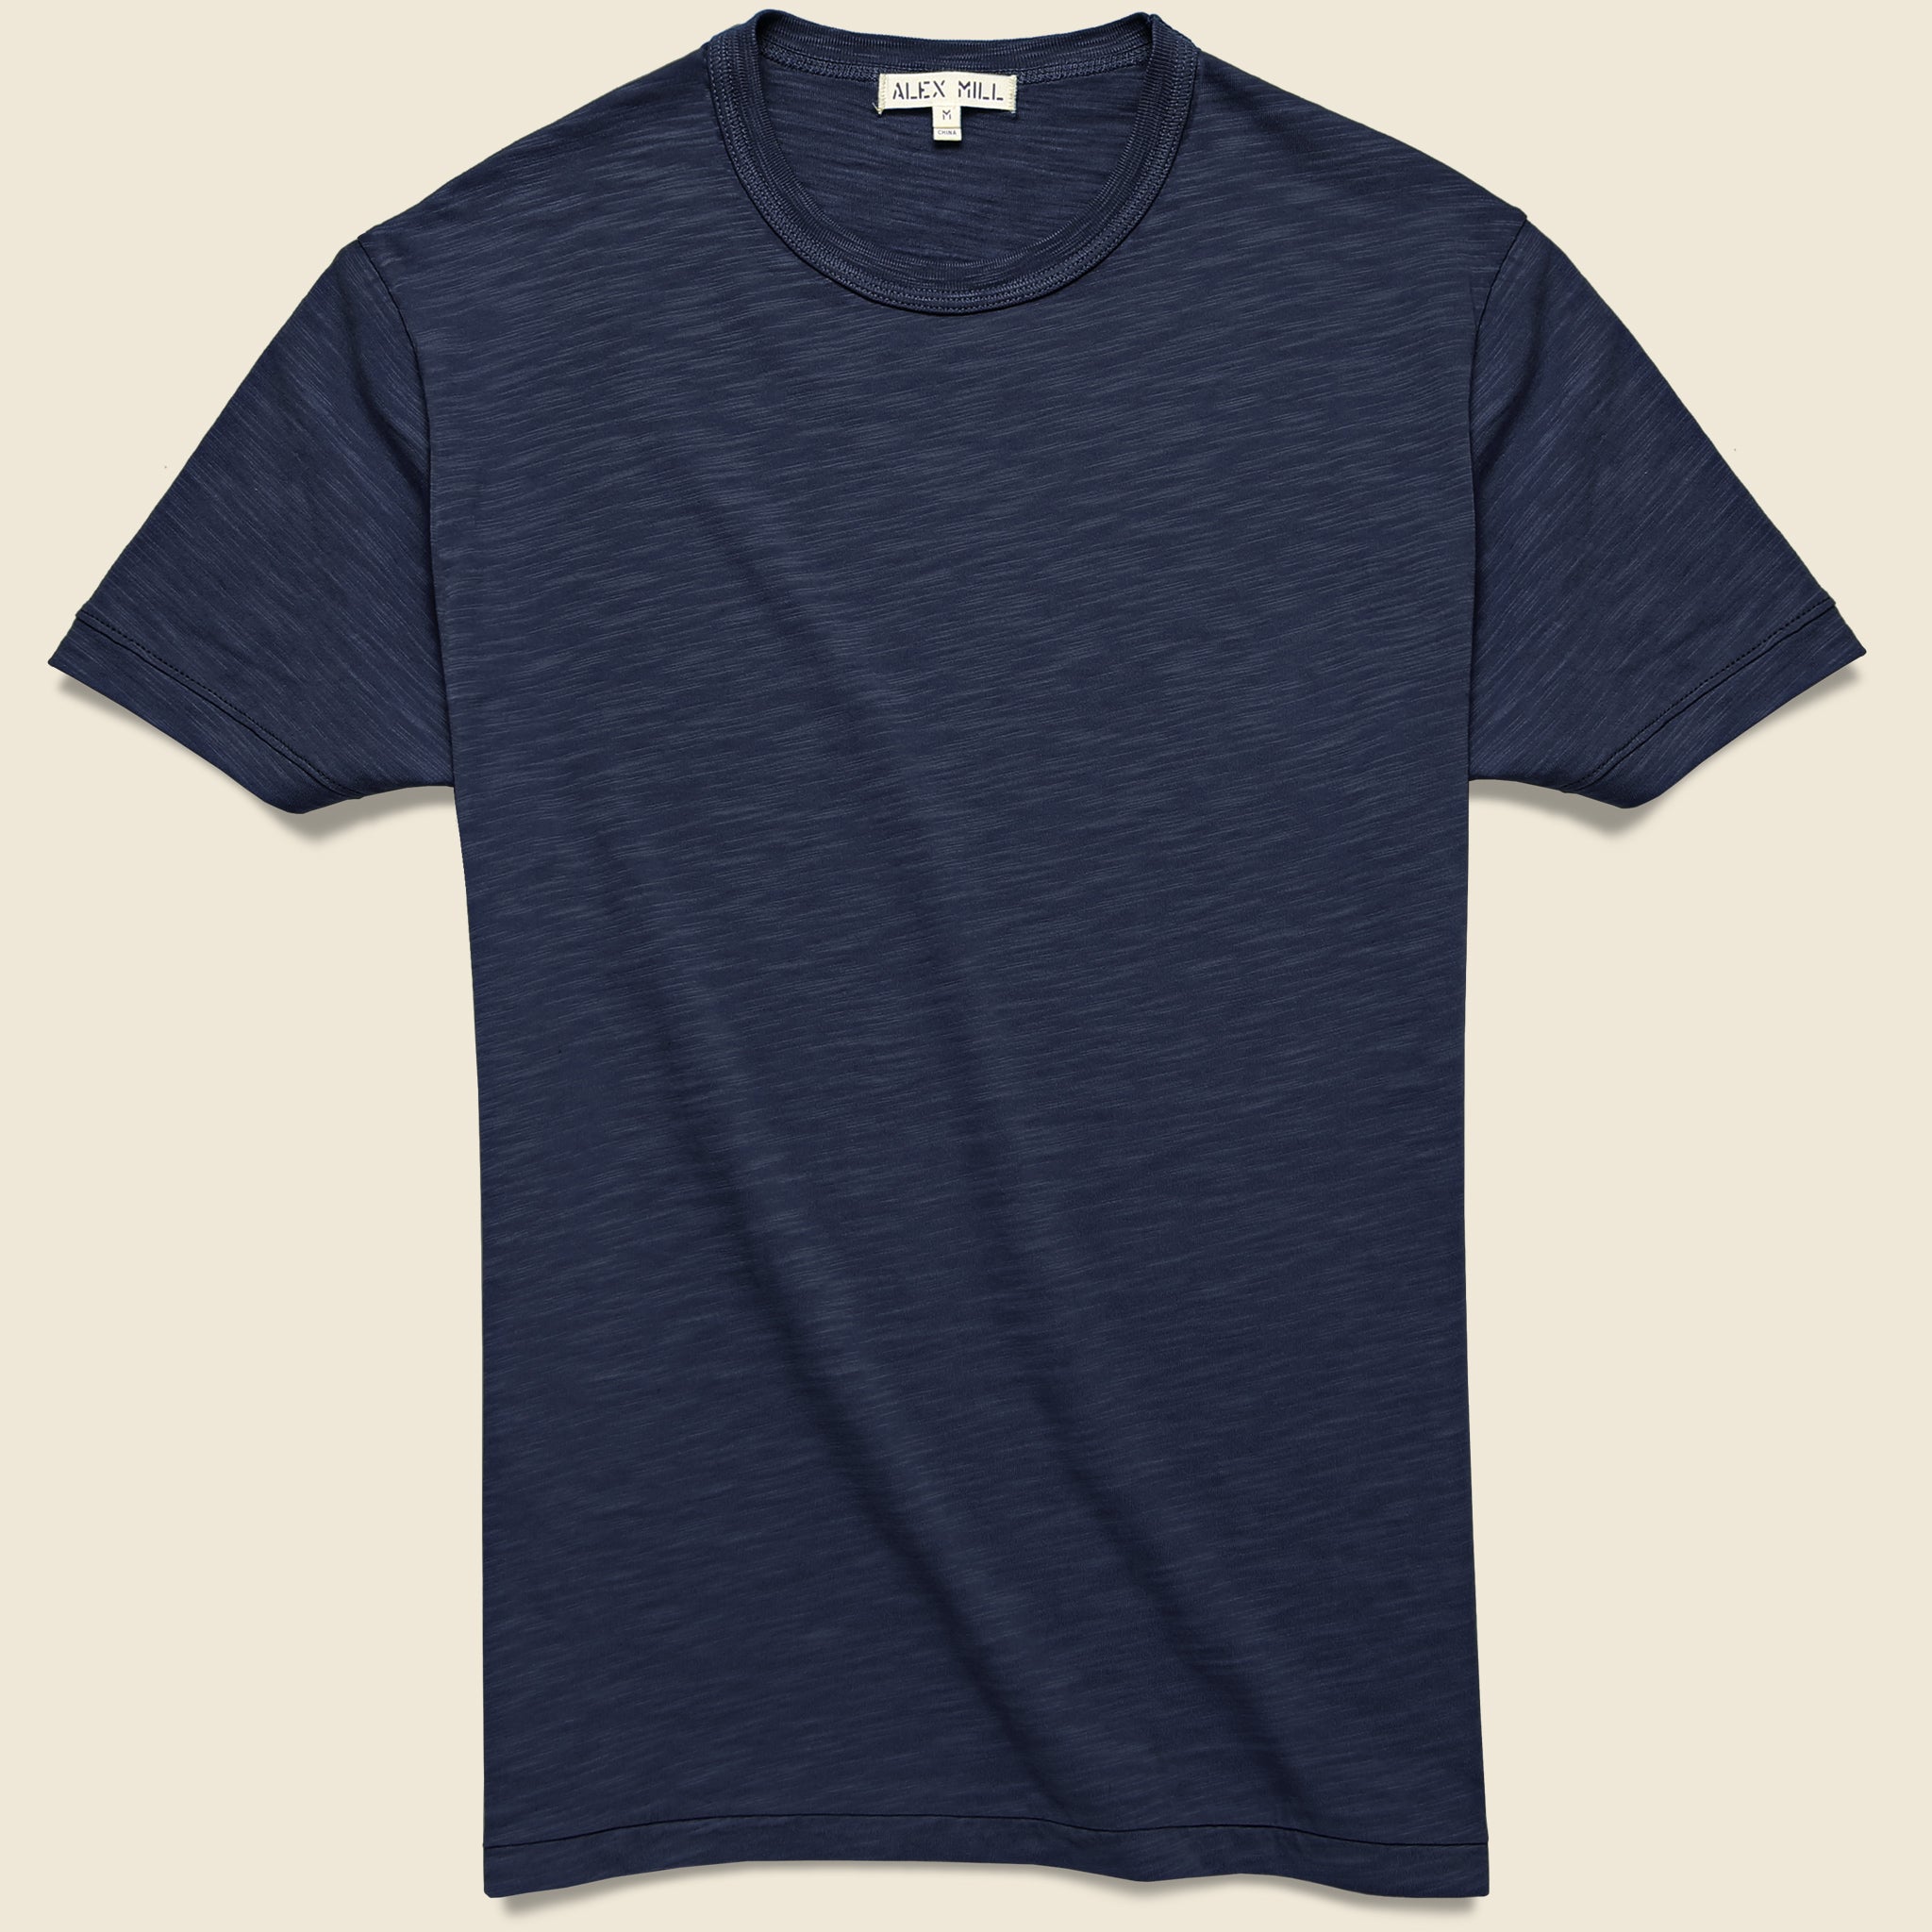 Standard Crew Tee - Navy - Alex Mill - STAG Provisions - Tops - S/S Tee